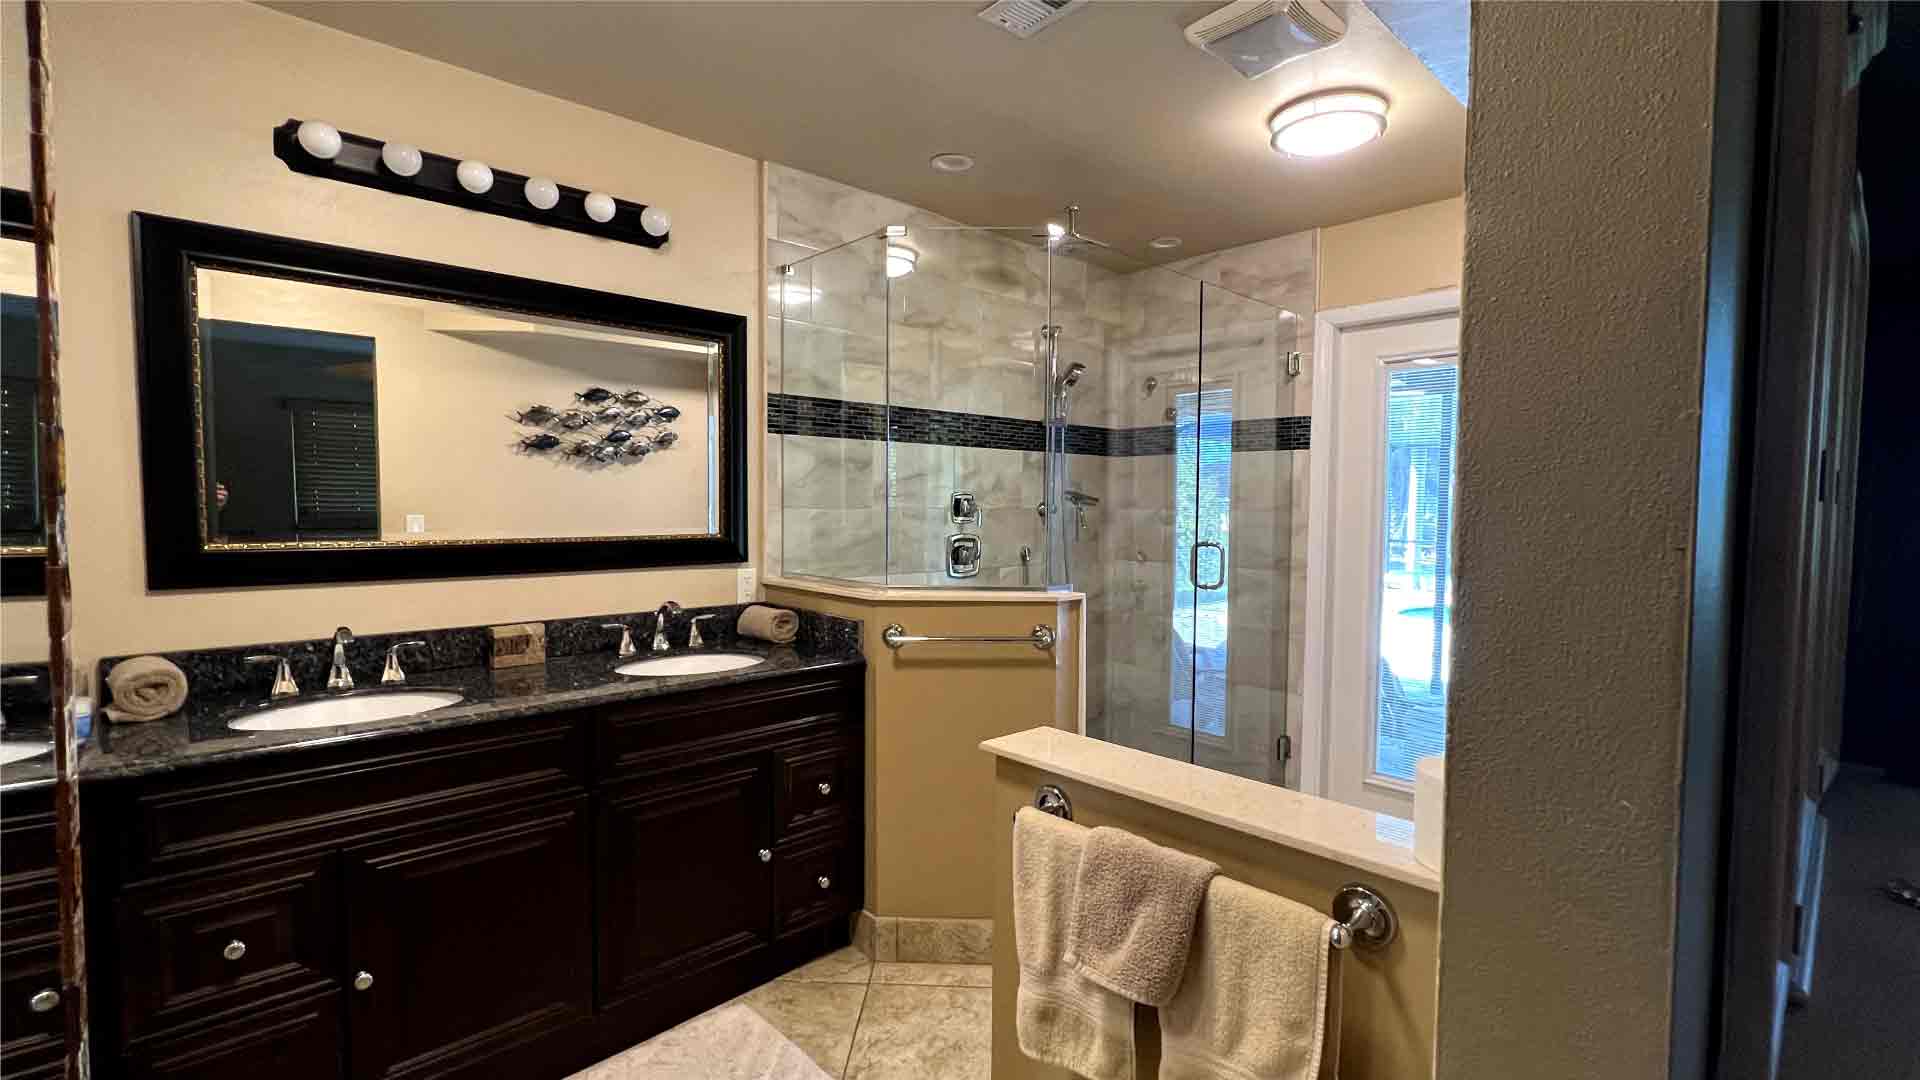 Bathroom - Regular cleaning in Cape Coral by Goldmillio - Apr 12